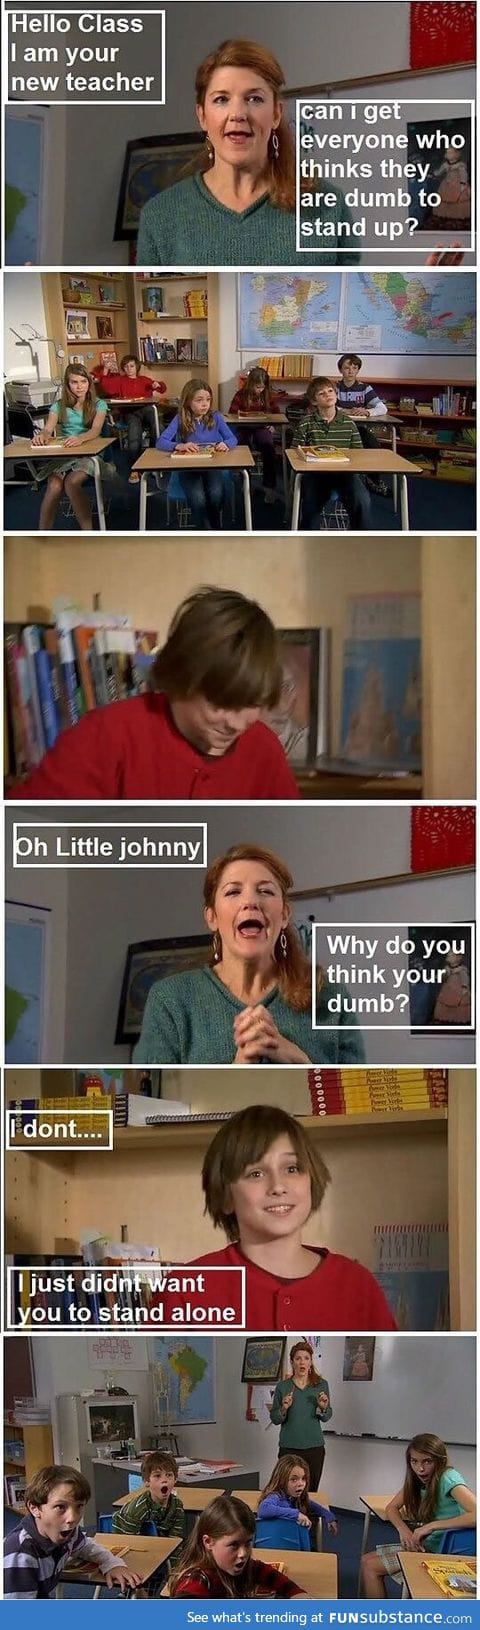 Little Johnny has no chill.